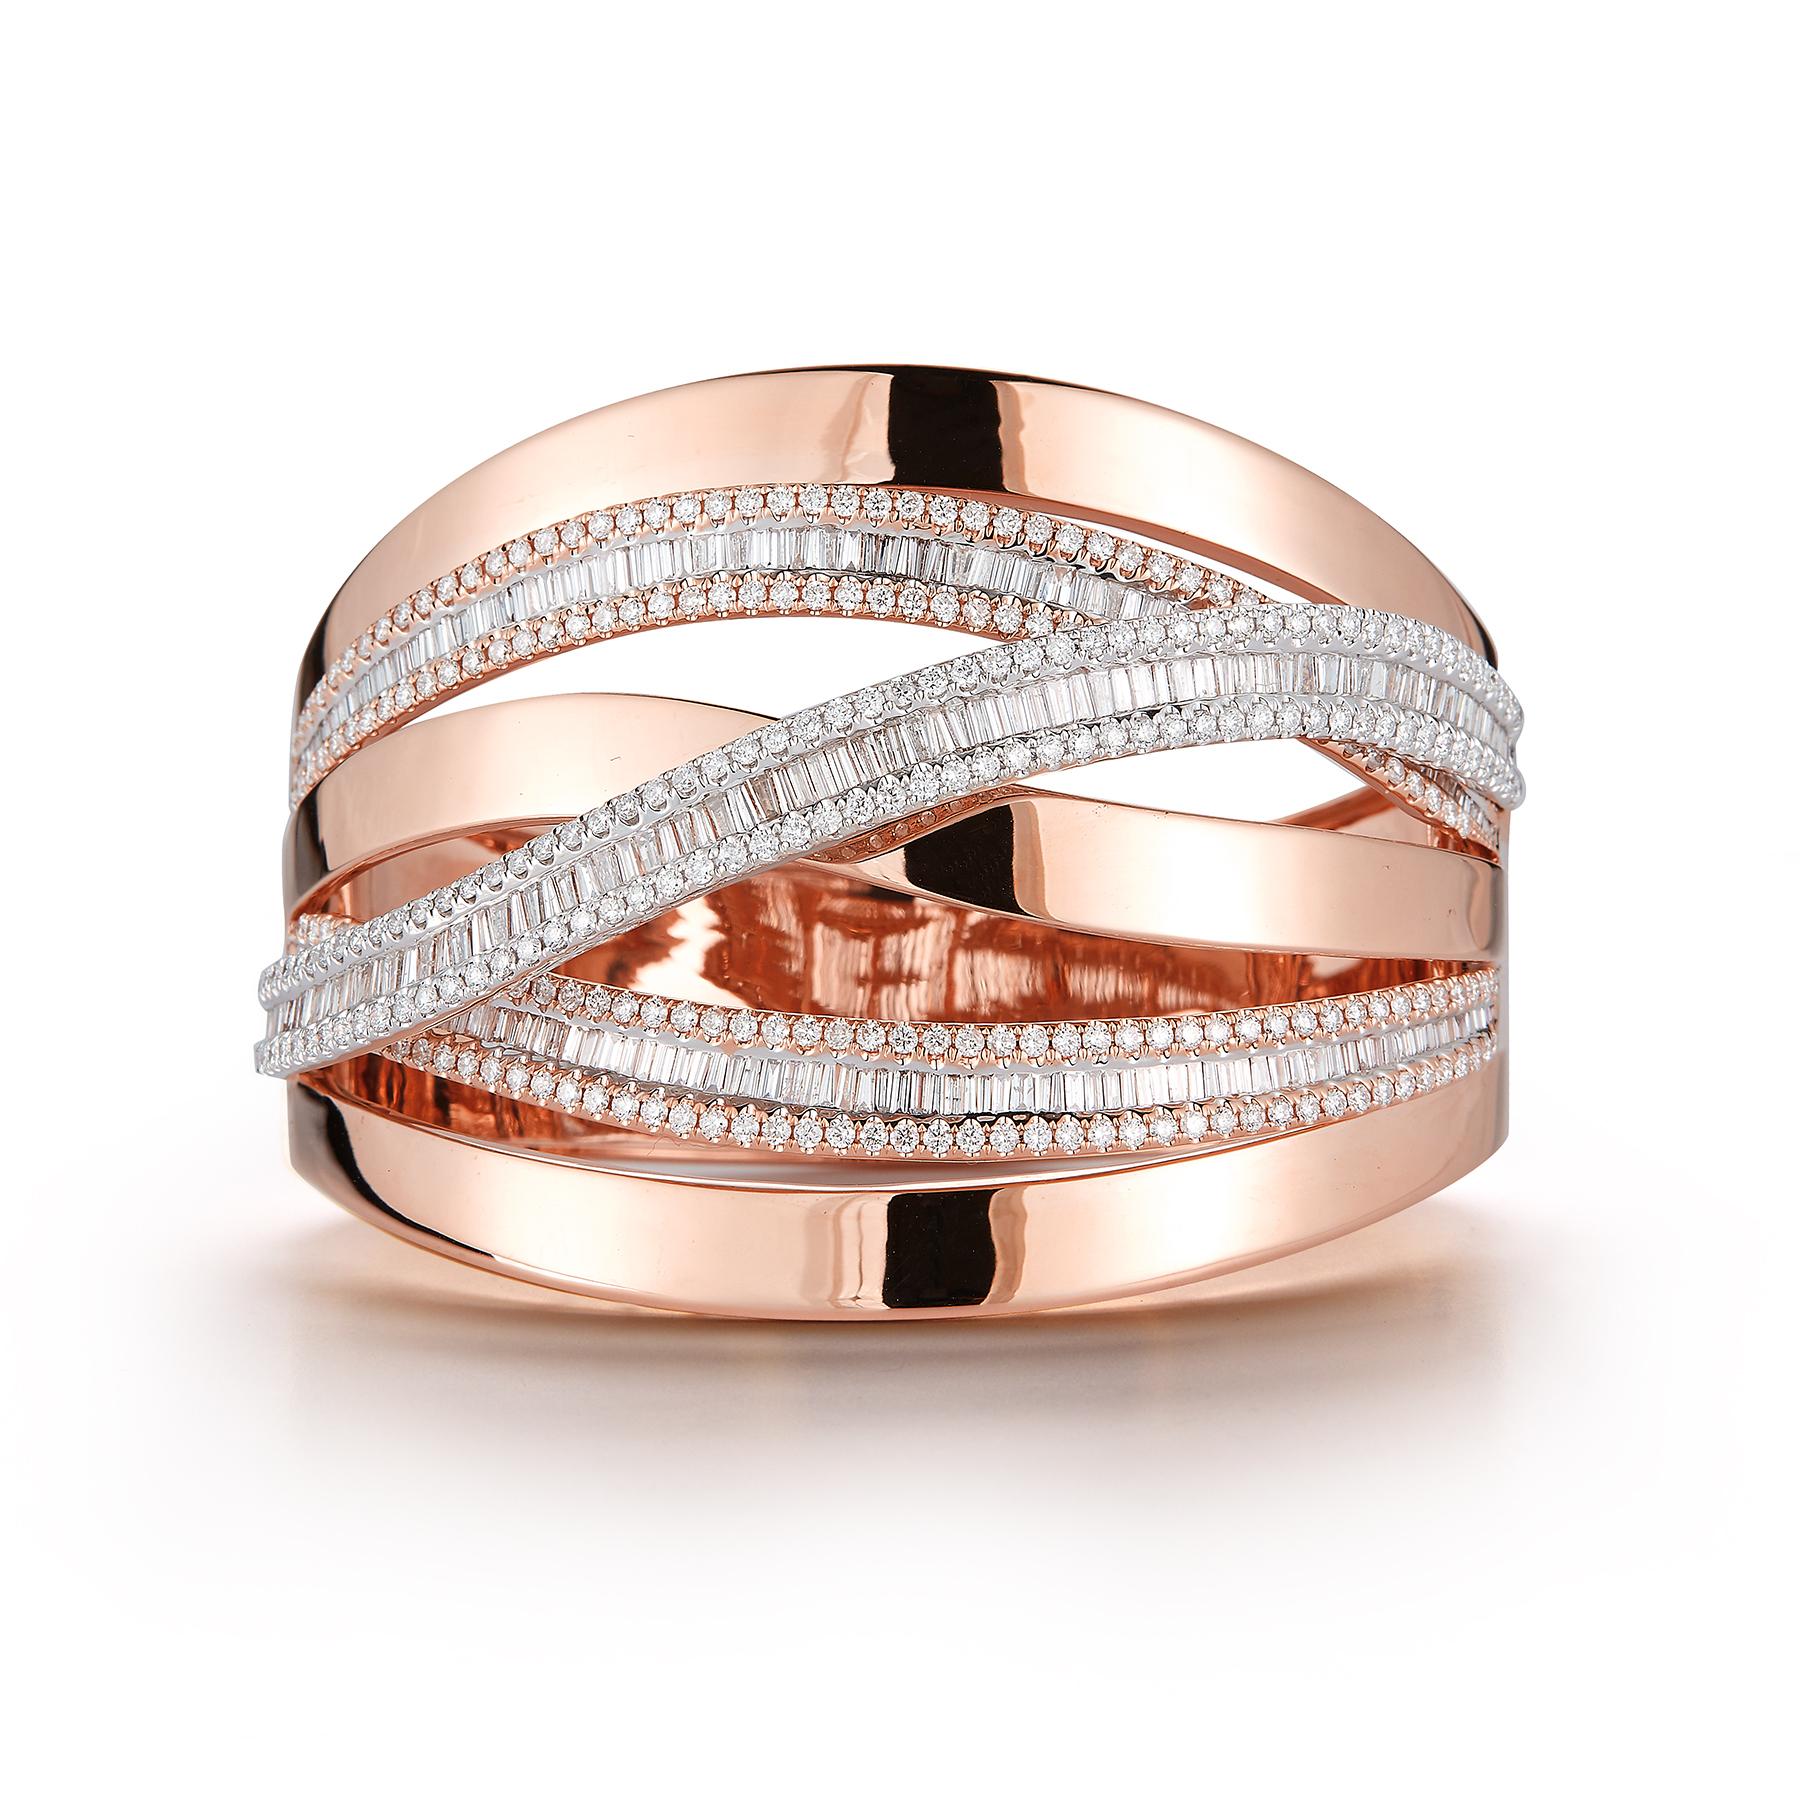 Gorgeous Eye-Catching 18K Pink Gold Bangle Bracelet in a unique Cuff-Style with 3 Winding Rows of Smooth Pink Gold Intertwined with 3 Winding Rows of 252 Round & Baguette Dazzling White Diamonds Totaling 7.30 Carats. 